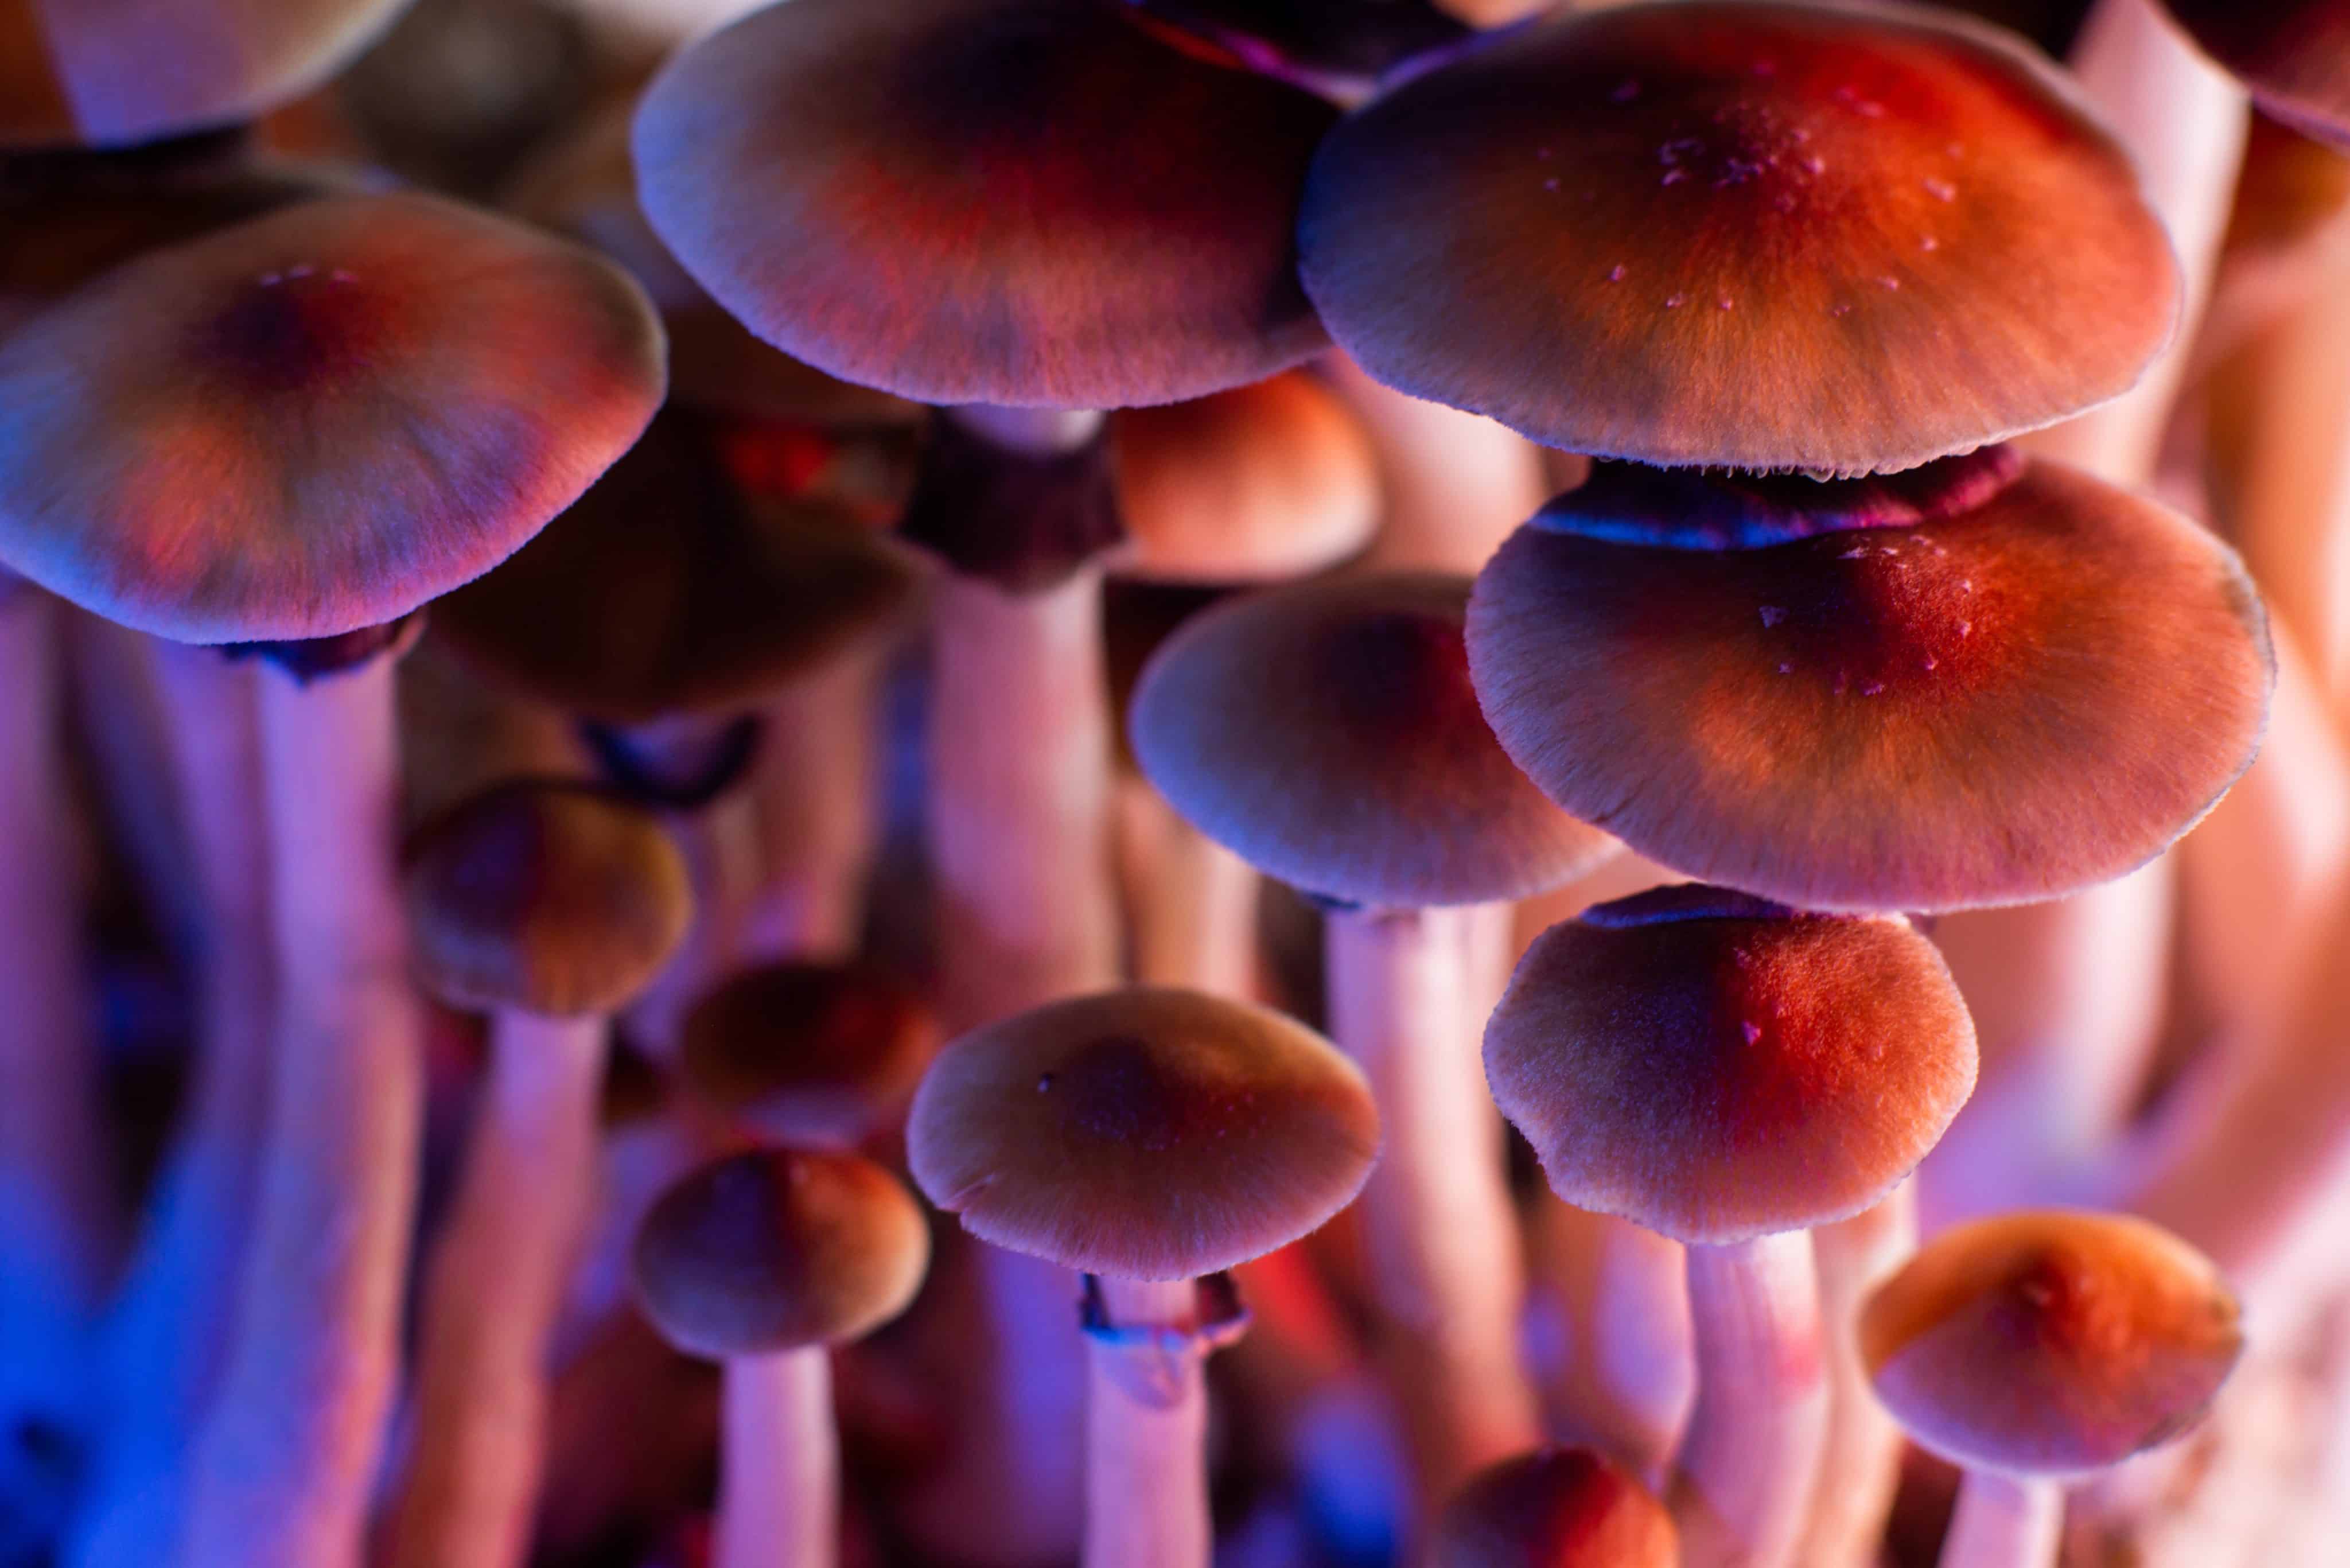 San Francisco City Leaders To Consider Psychedelics Decriminalization Measure | High Times